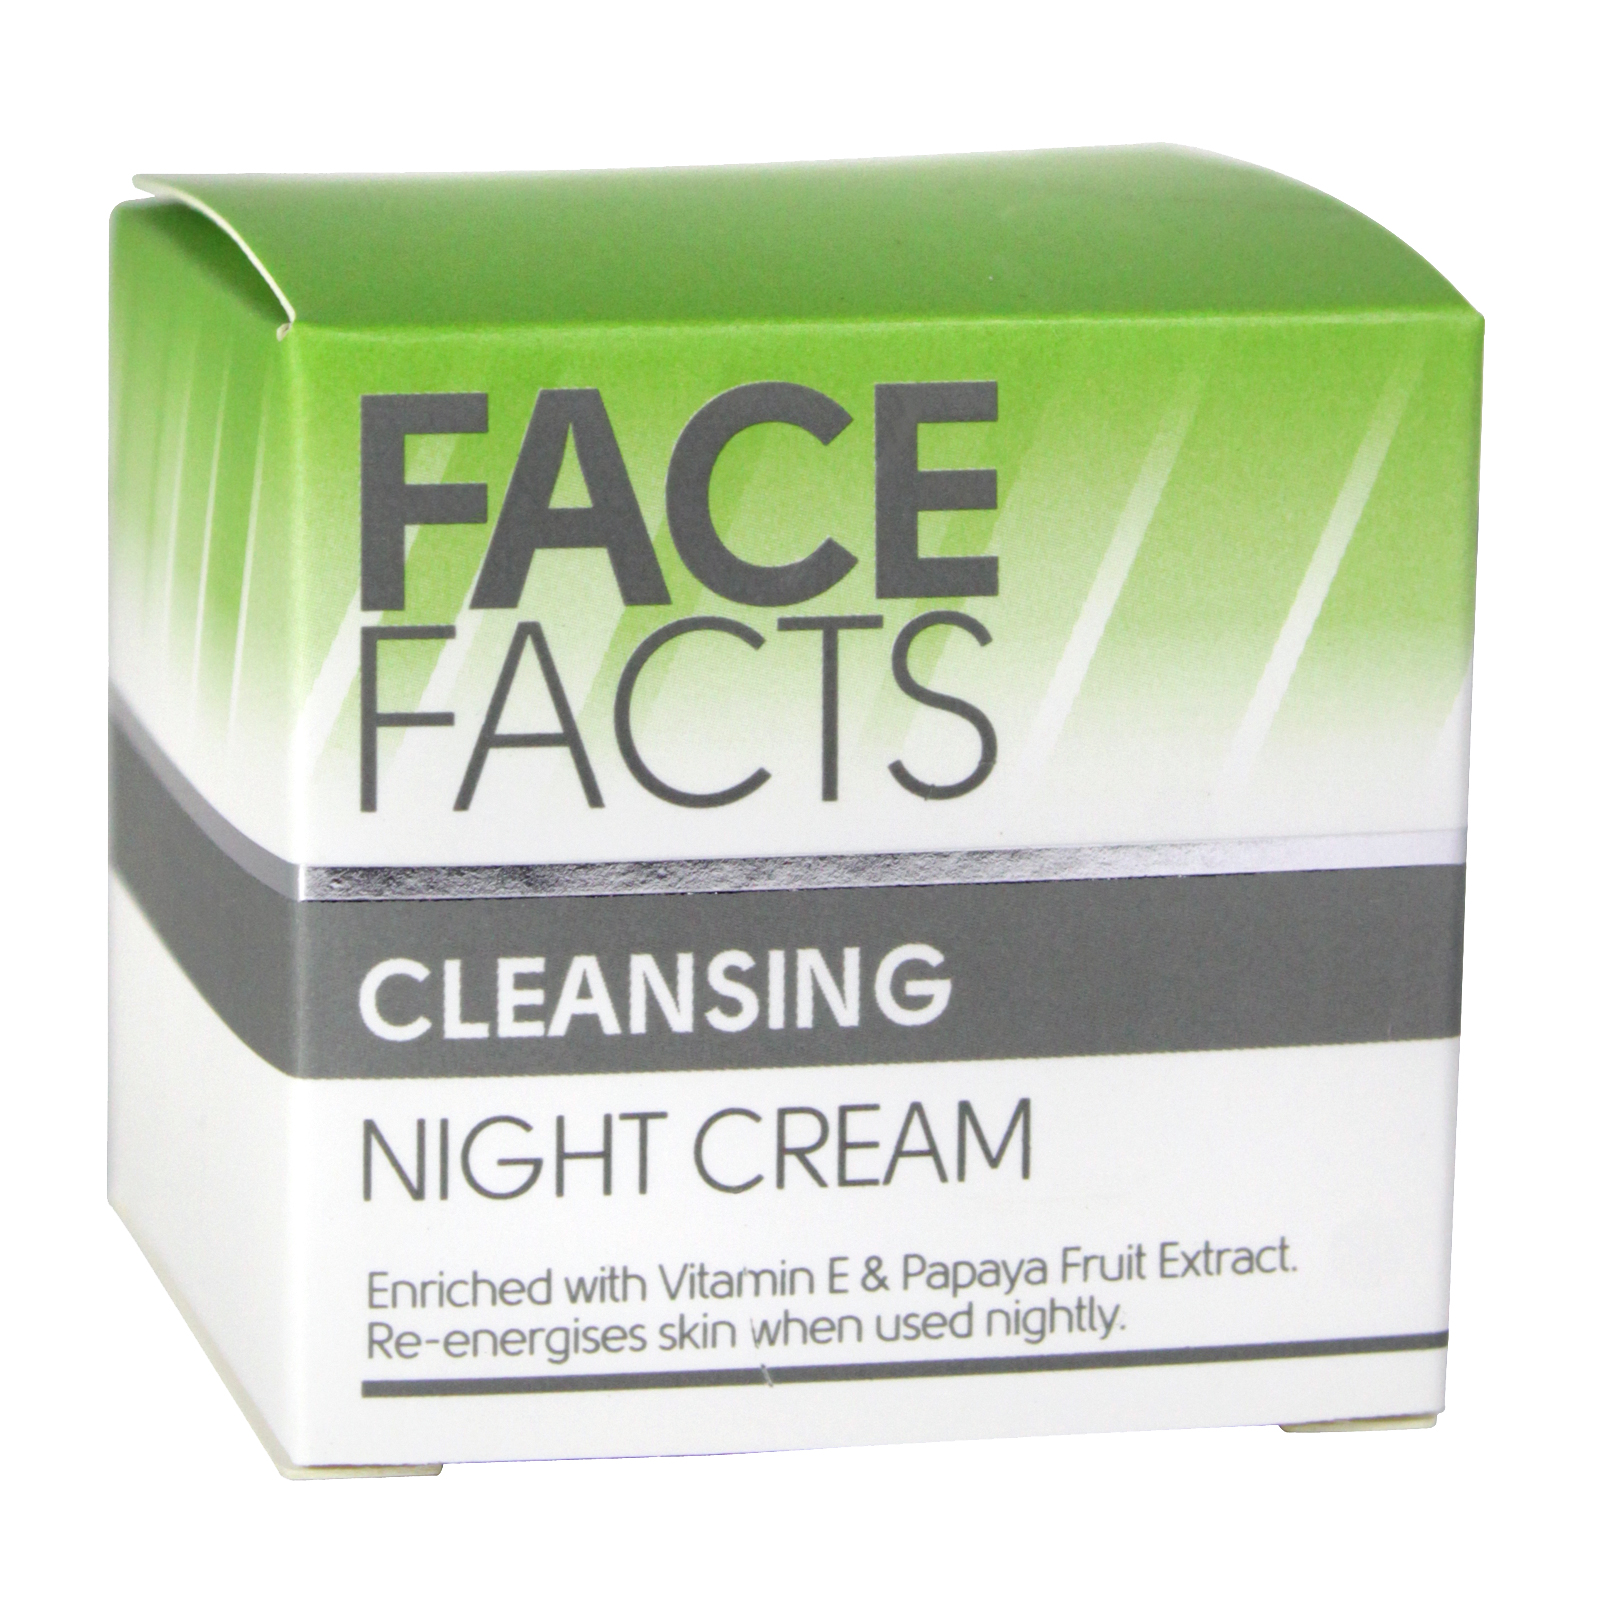 Face Facts Cleansing Y ”Cream 50ml